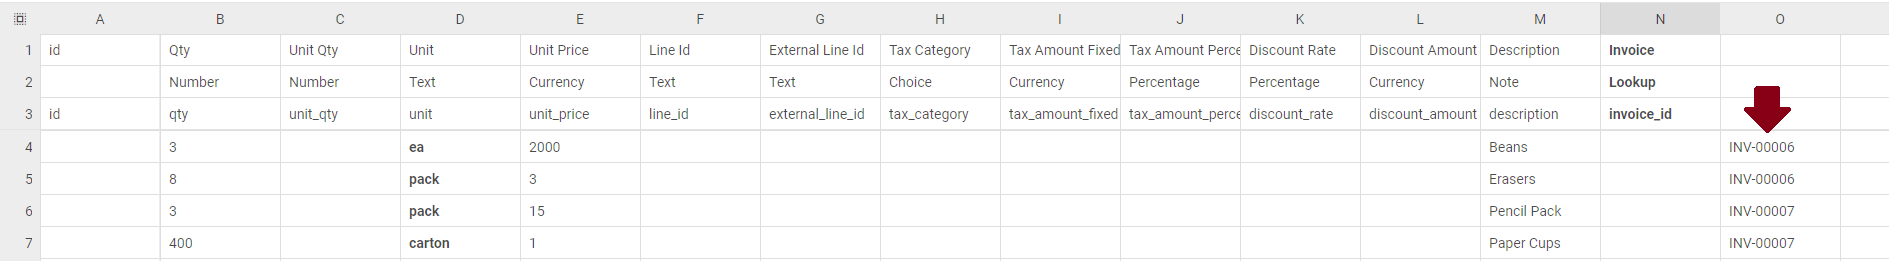 Data invoice line sheet with Invoice References in a column with no heading